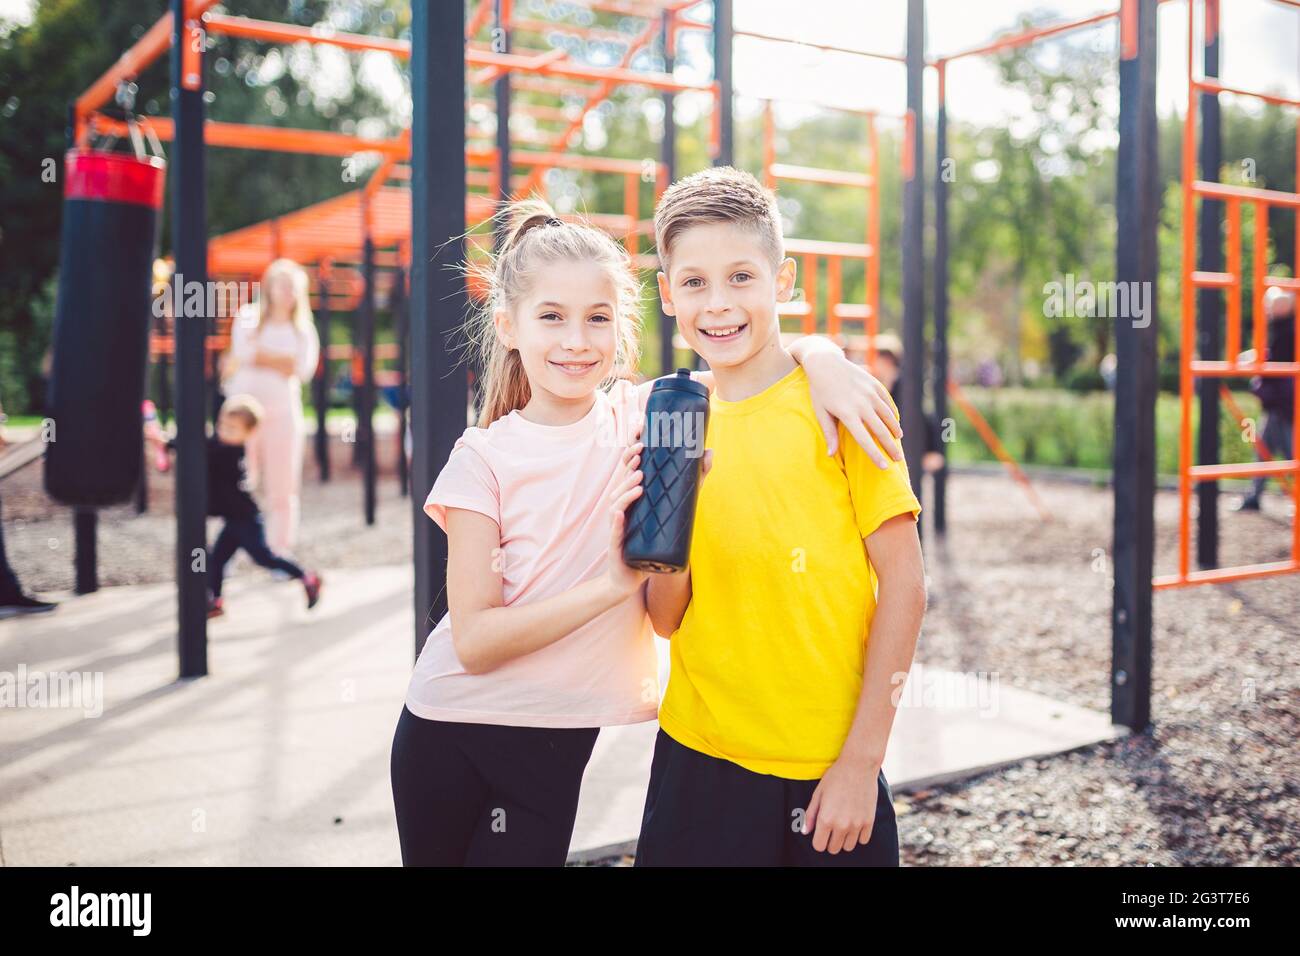 Sportive friends. Brother and sister standing together at street city gym. Children athletes hug smile during workout training. Stock Photo